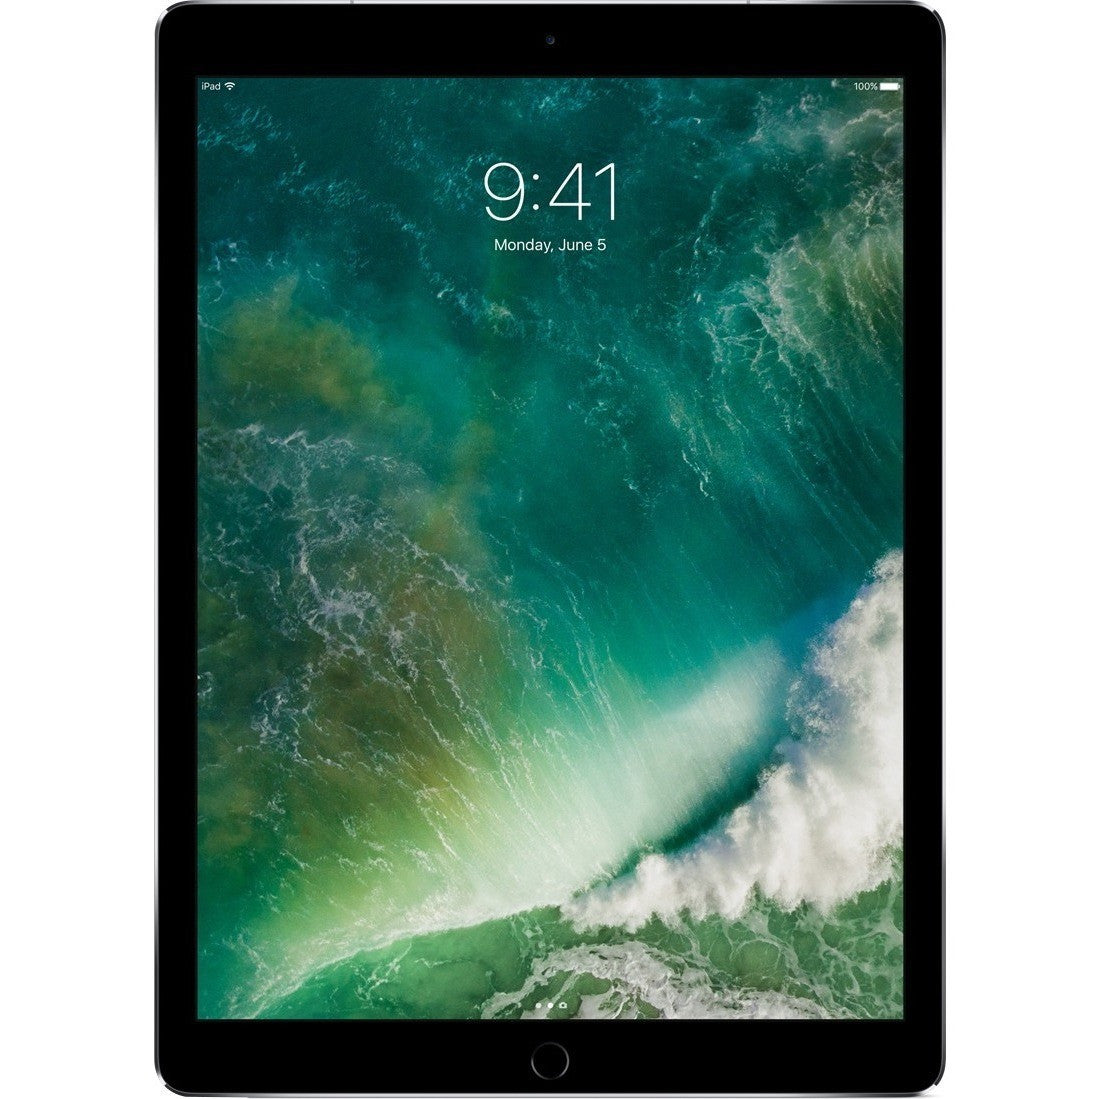 Apple iPad Pro Tablet - 12.9" - Apple A10X Hexa-core (6 Core) - 256 GB - iOS 10 - 2732 x 2048 - Retina Display - 4G - GSM, CDMA2000 Supported - Space Gray